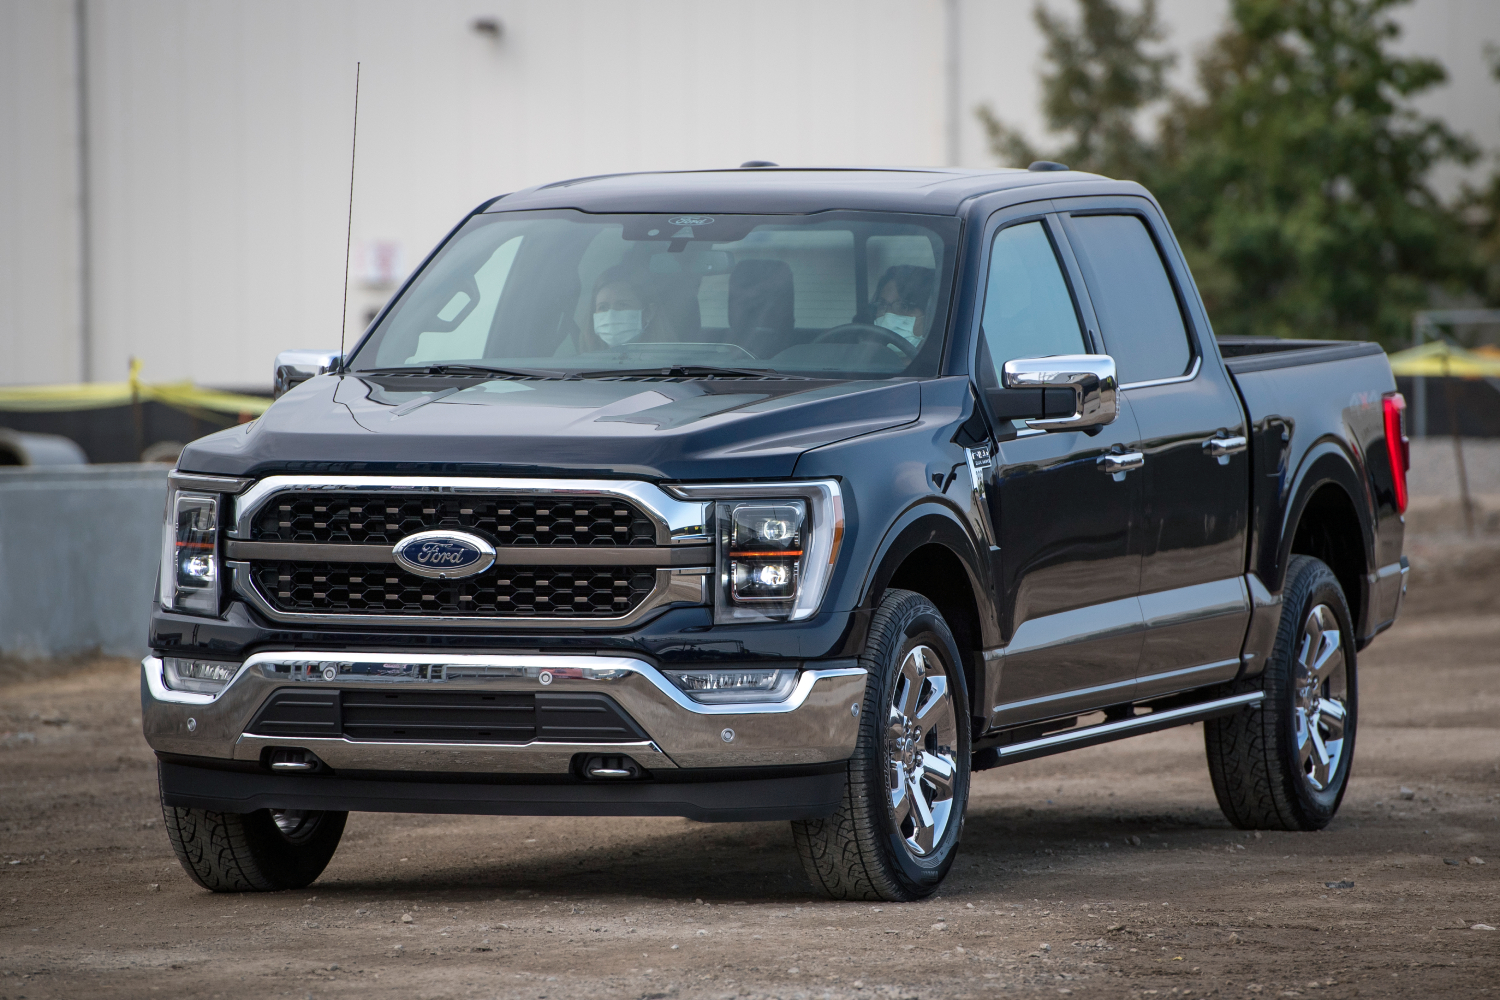 iSeeCars says the Ford F-150 Is the best-selling used car